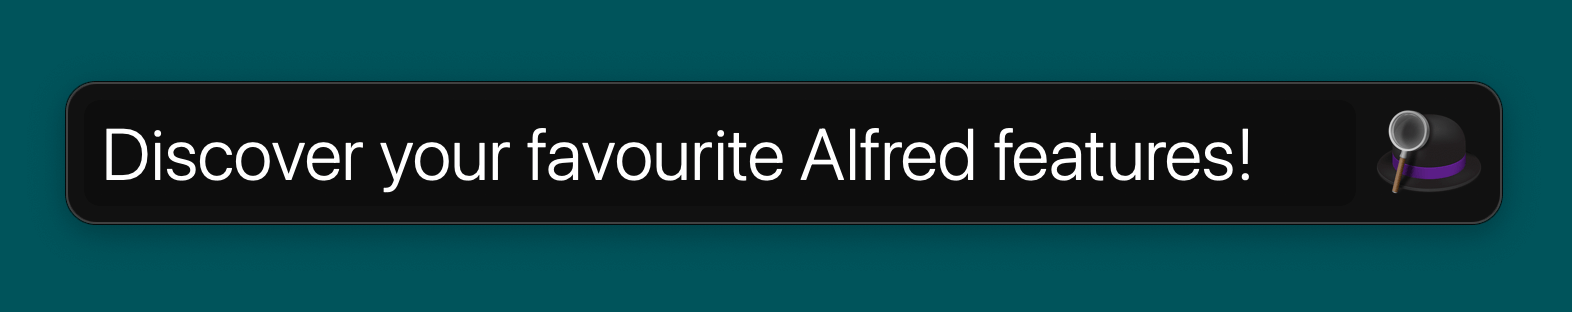 Discover Alfred features